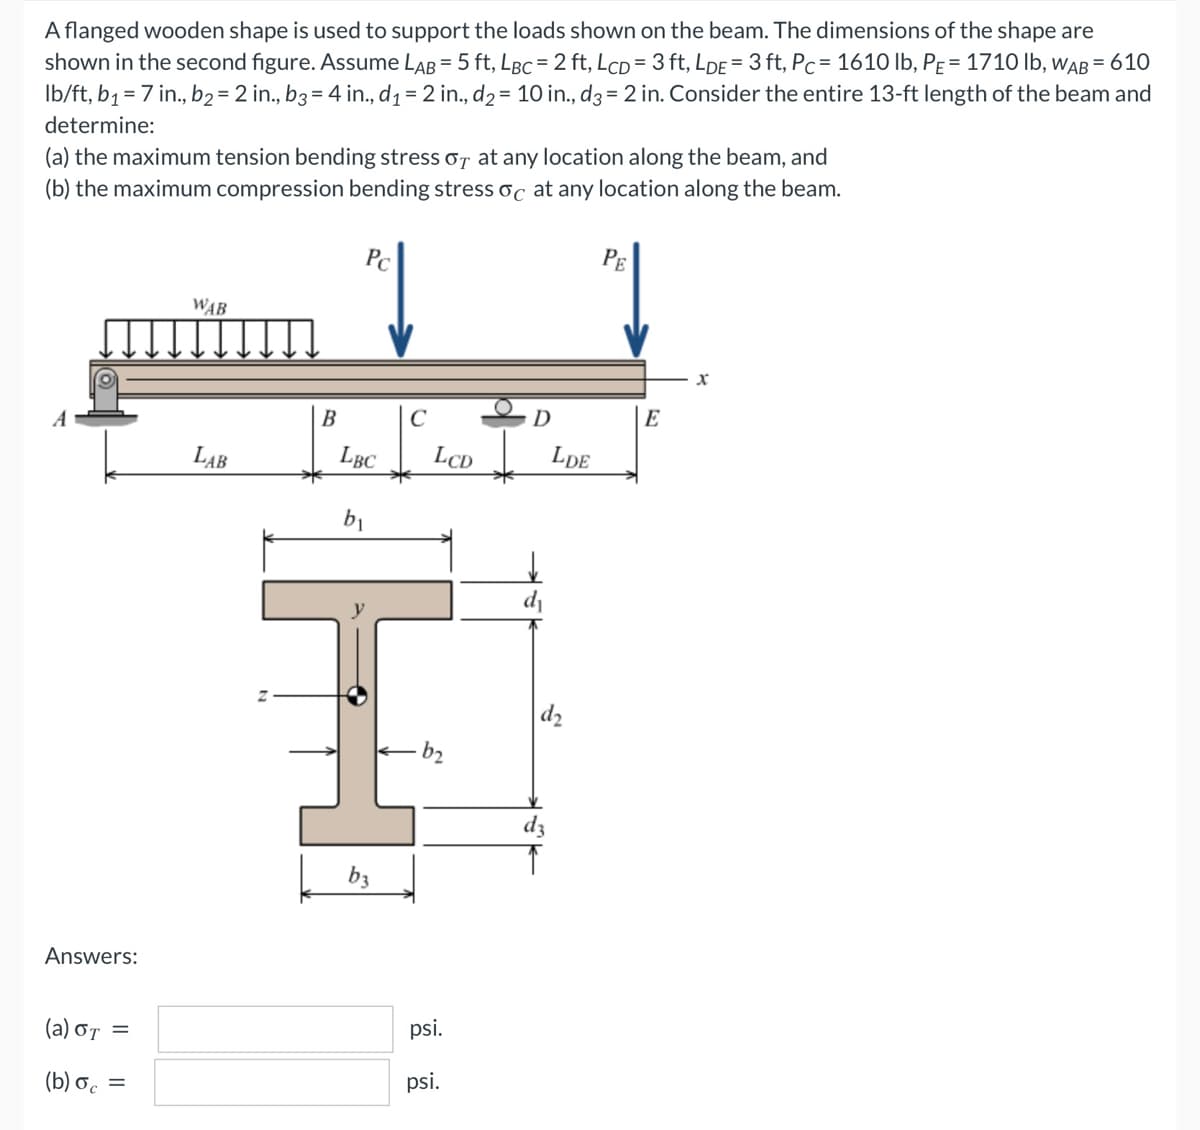 A flanged wooden shape is used to support the loads shown on the beam. The dimensions of the shape are
shown in the second figure. Assume LAB = 5 ft, LBC = 2 ft, LCD= 3 ft, LDE = 3 ft, Pc = 1610 lb, PE = 1710 lb, WAB= 610
lb/ft, b₁ = 7 in., b₂ = 2 in., b3 = 4 in., d₁ = 2 in., d₂ = 10 in., d3 = 2 in. Consider the entire 13-ft length of the beam and
determine:
(a) the maximum tension bending stress or at any location along the beam, and
(b) the maximum compression bending stress oc at any location along the beam.
Pc
PE
WAB
X
A
LAB
Answers:
(a) στ =
(b) oc=
B
LBC
b₁
b3
C
LCD
psi.
psi.
D
d₁
dz
LDE
E